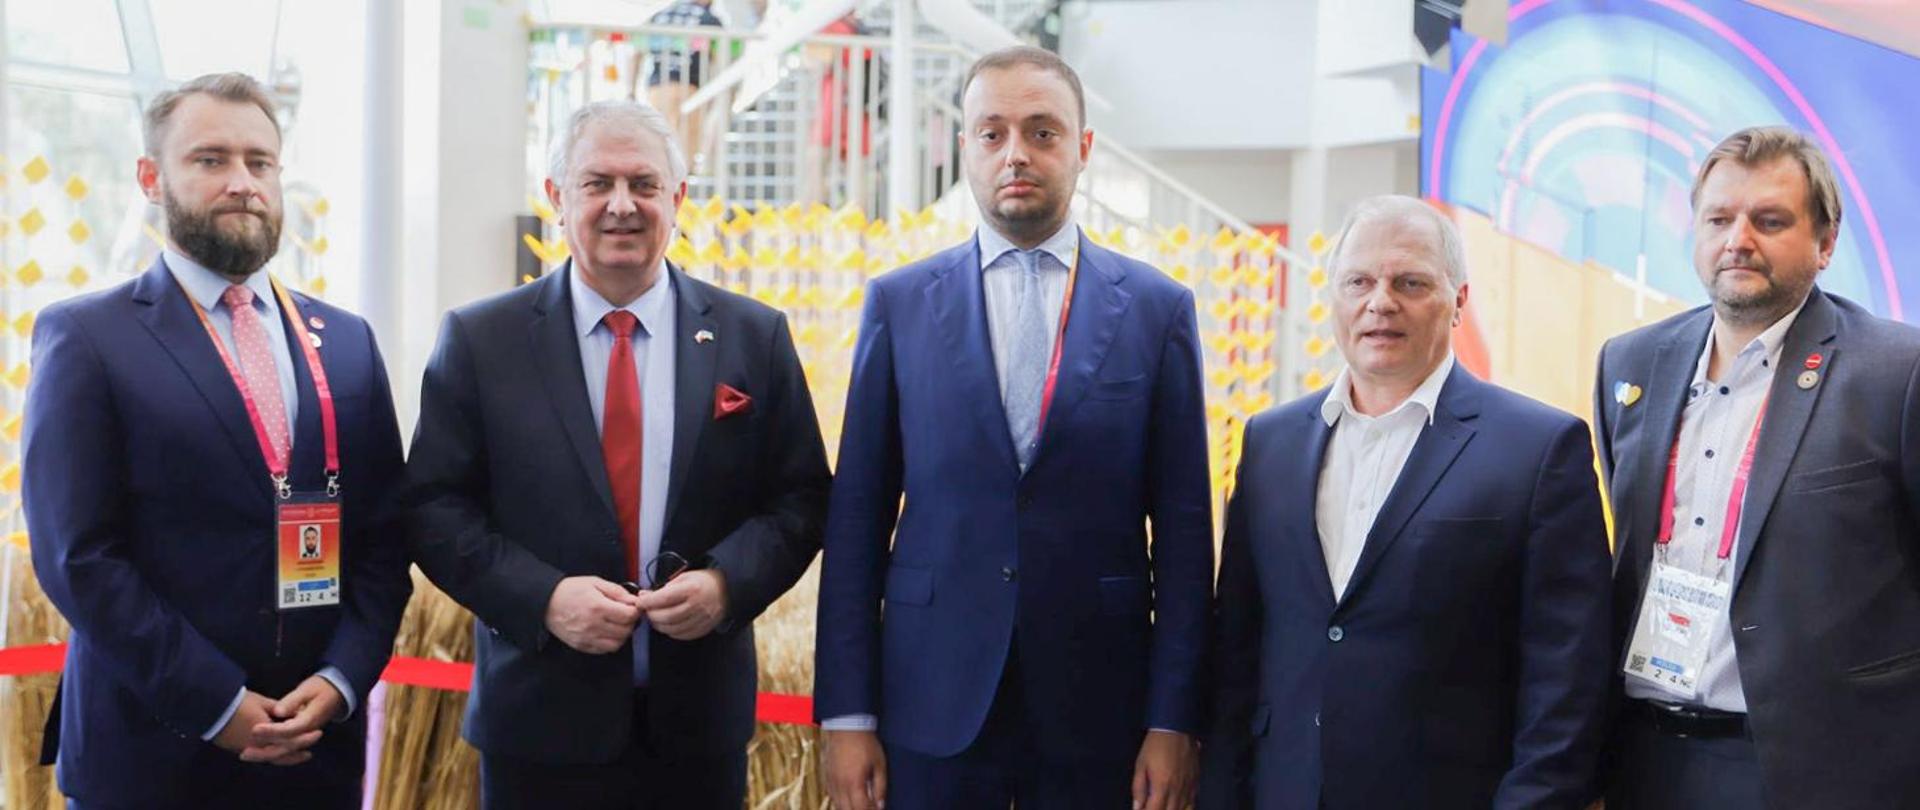 Deputy Minister of Economic Development and Technology Grzegorz Piechowiak at the Expo in Dubai, March 2022, among other participants of the meeting